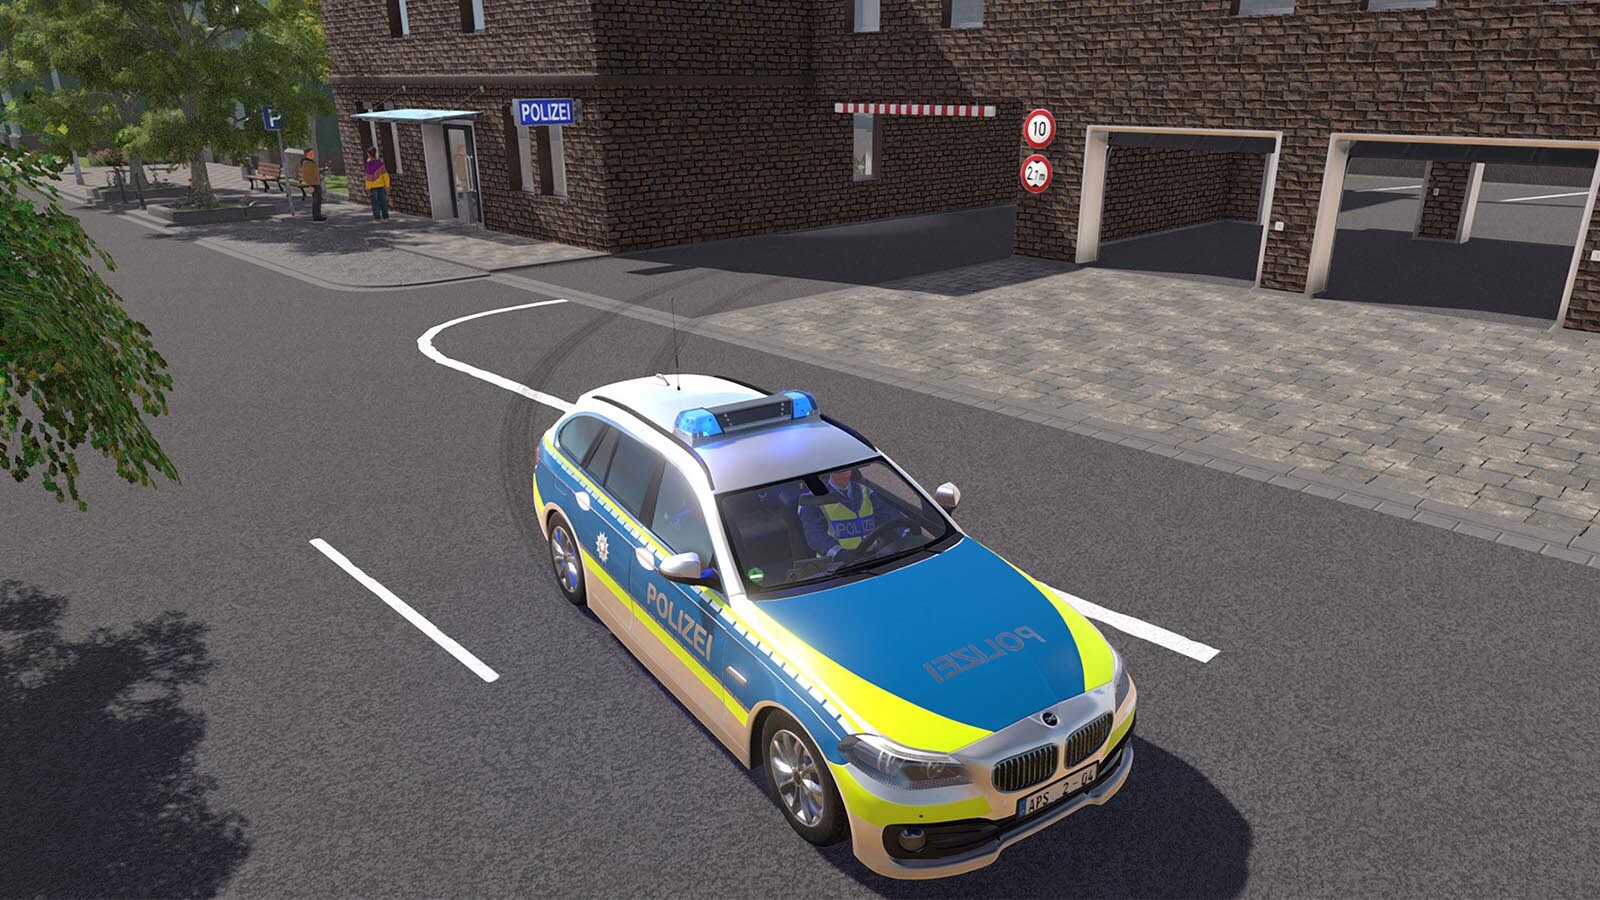 Autobahn Police Simulator 2 Steam Key for PC - Buy now